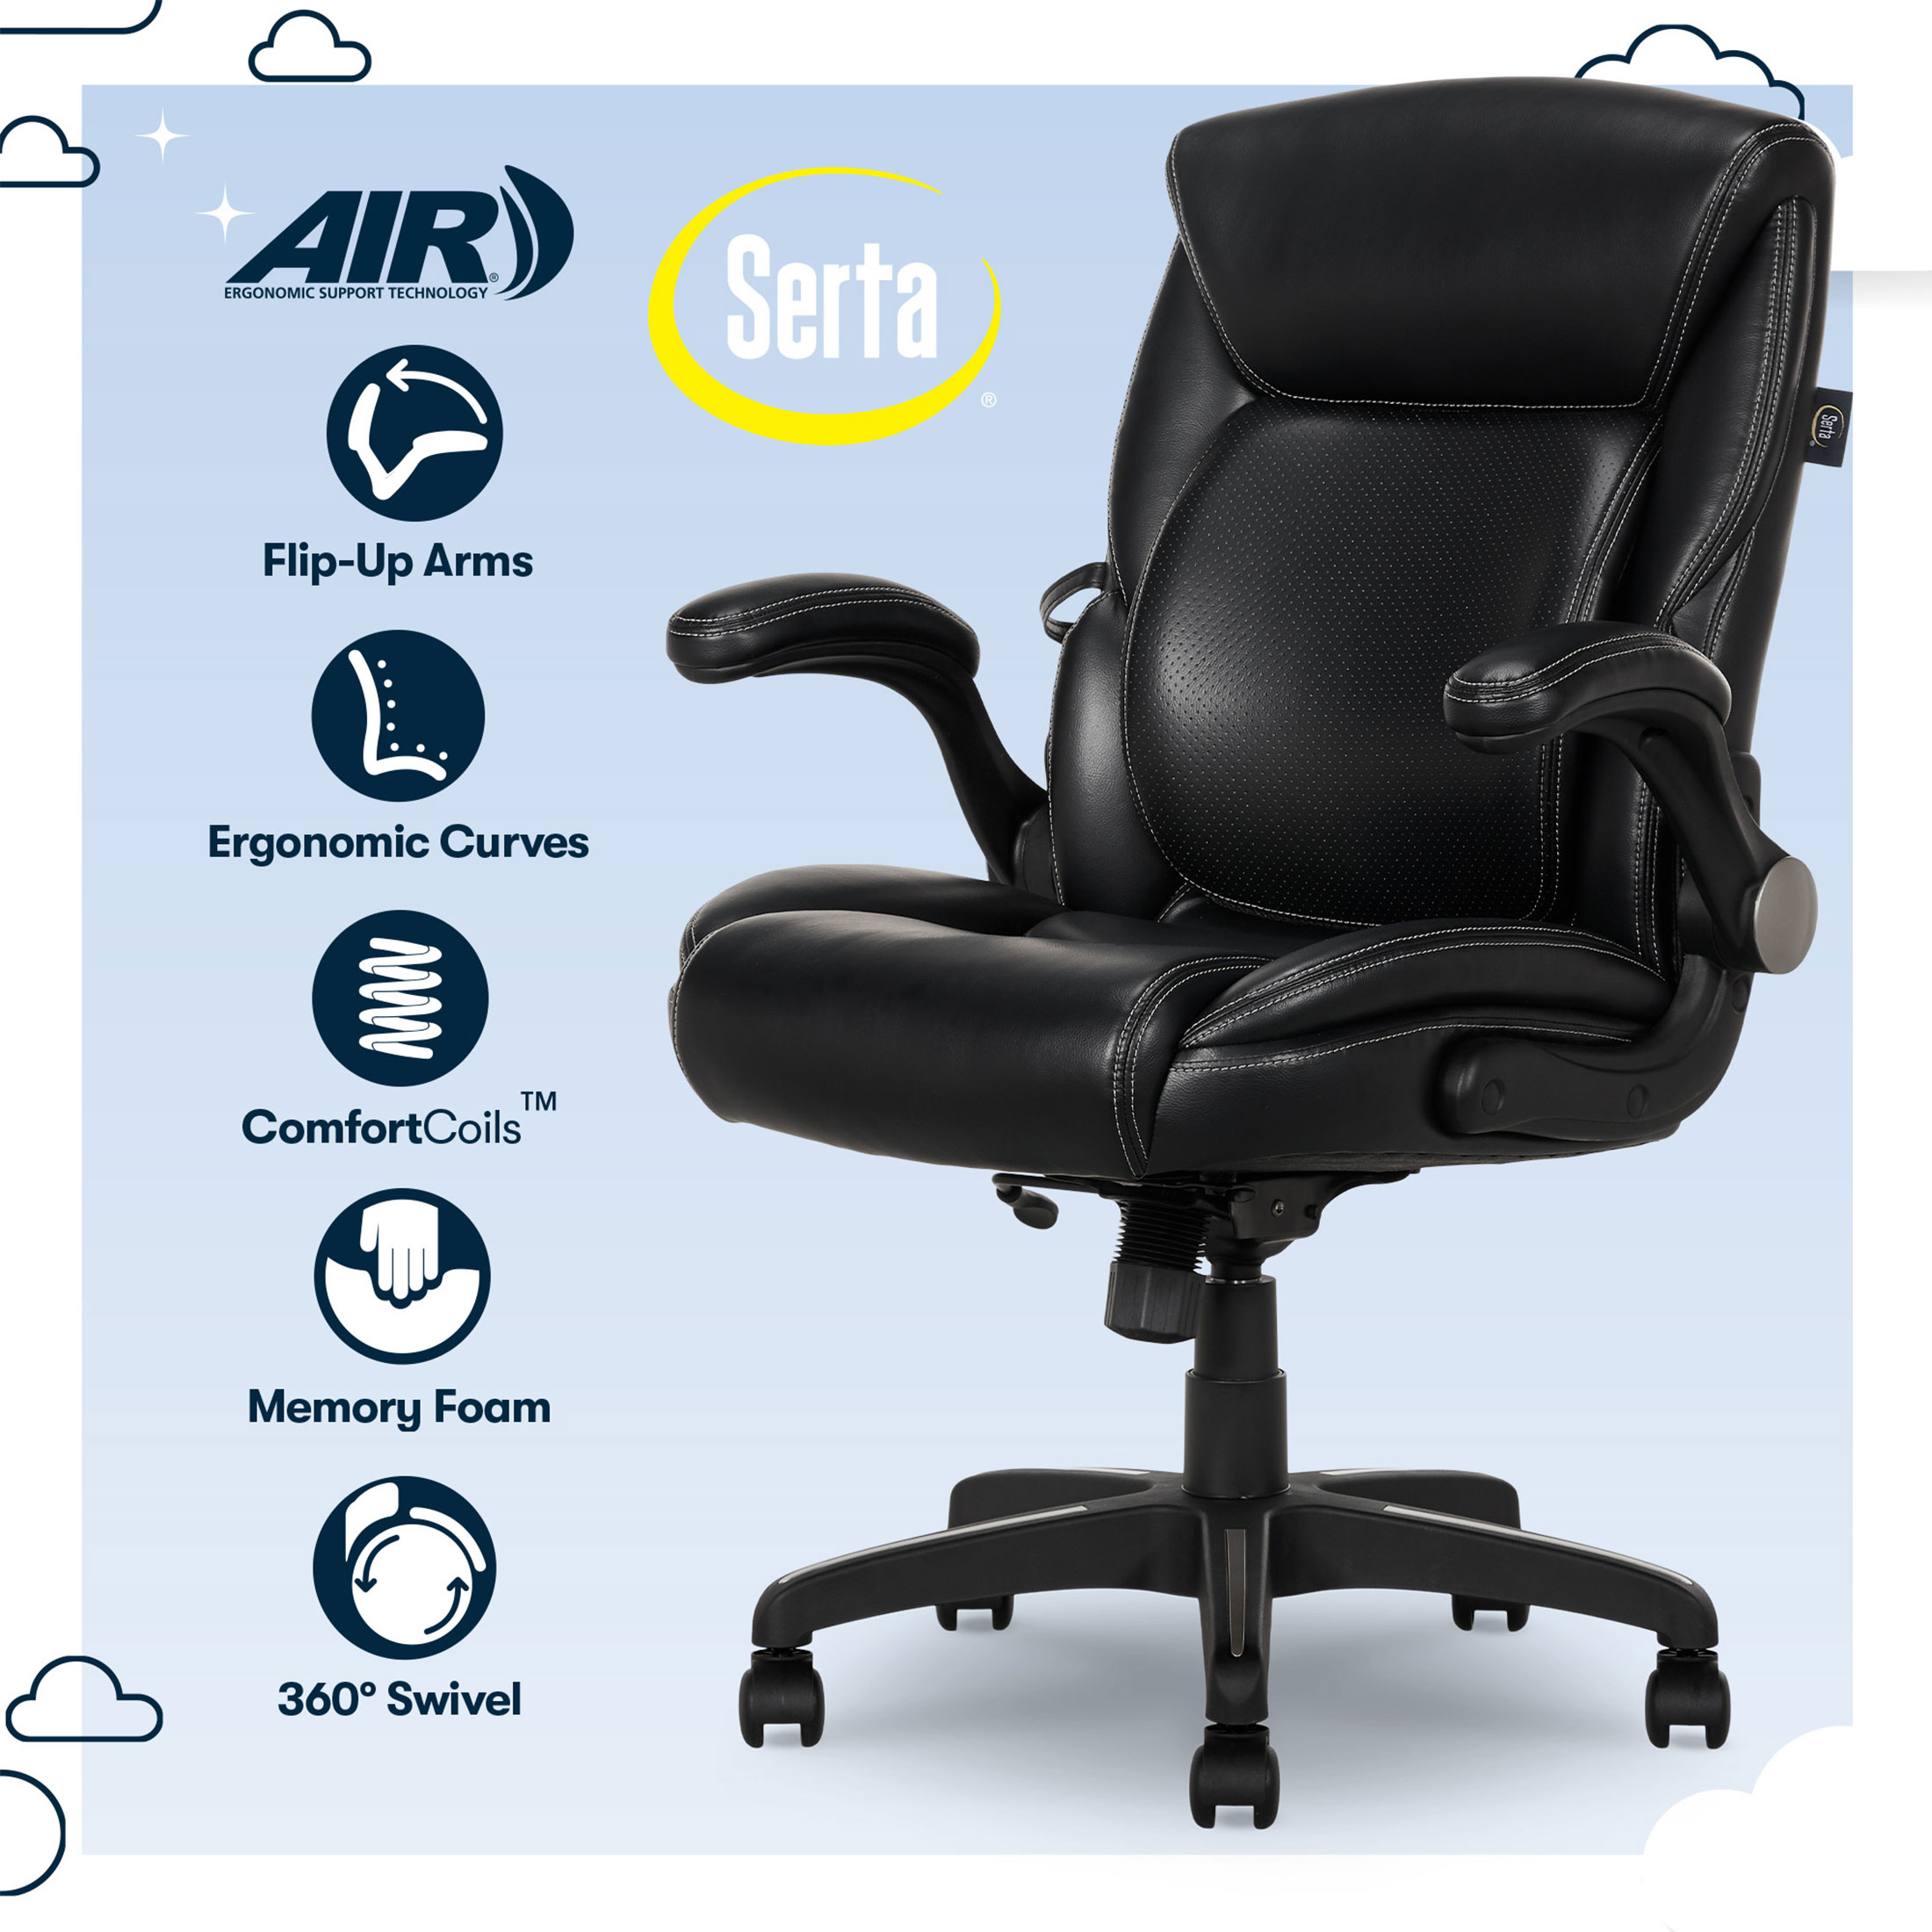 Serta Air Lumbar Bonded Leather Manager Office Chair, Black - image 3 of 15